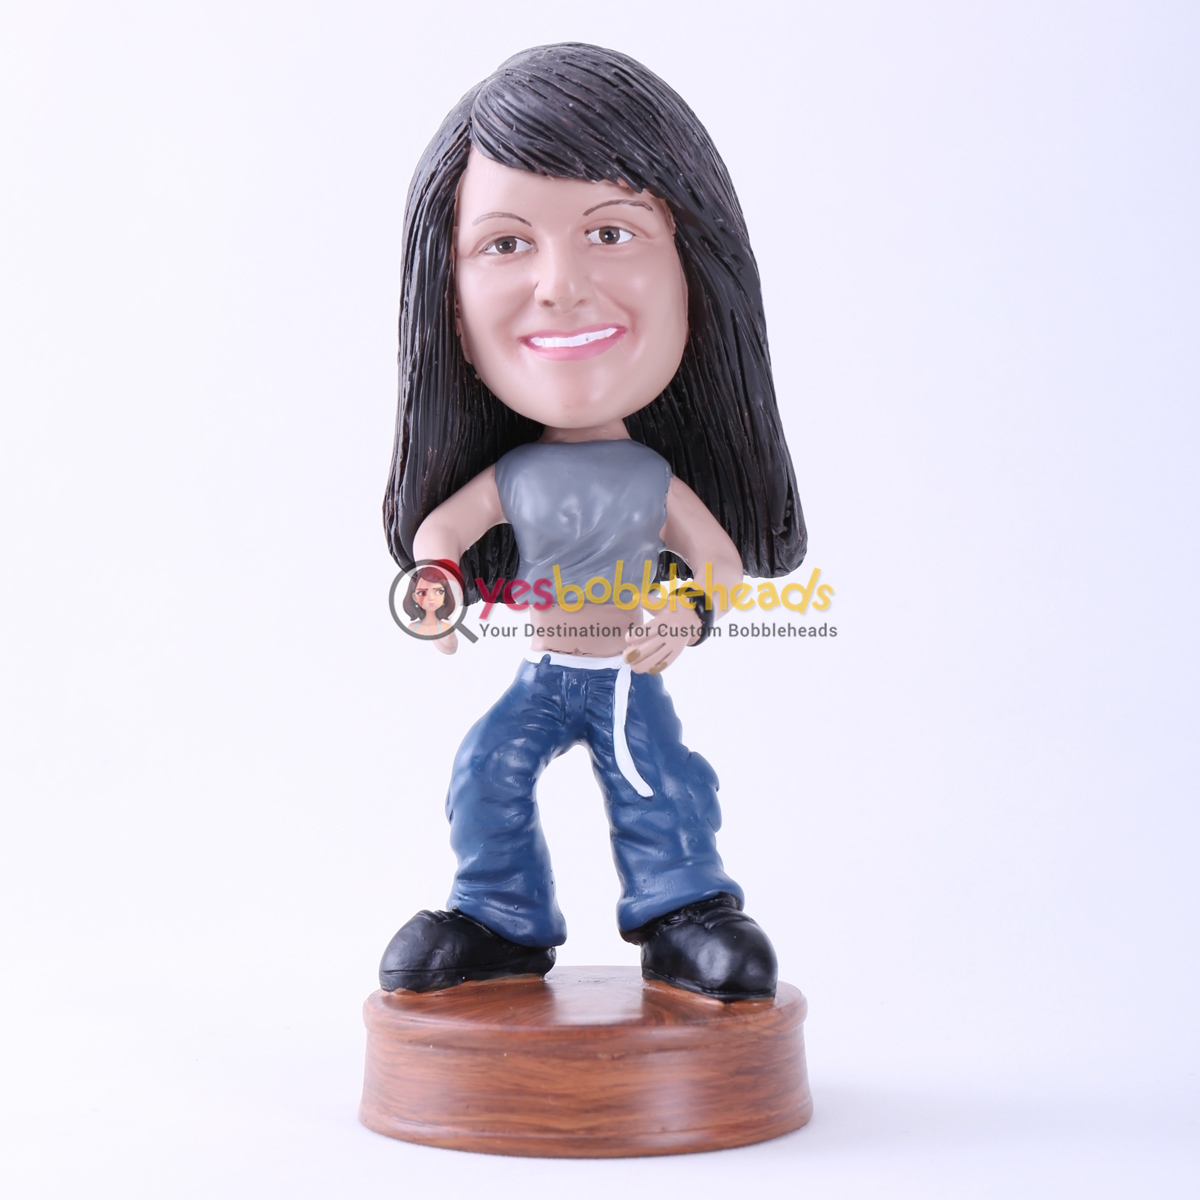 Picture of Custom Bobblehead Doll: Woman Ready to Wrestle